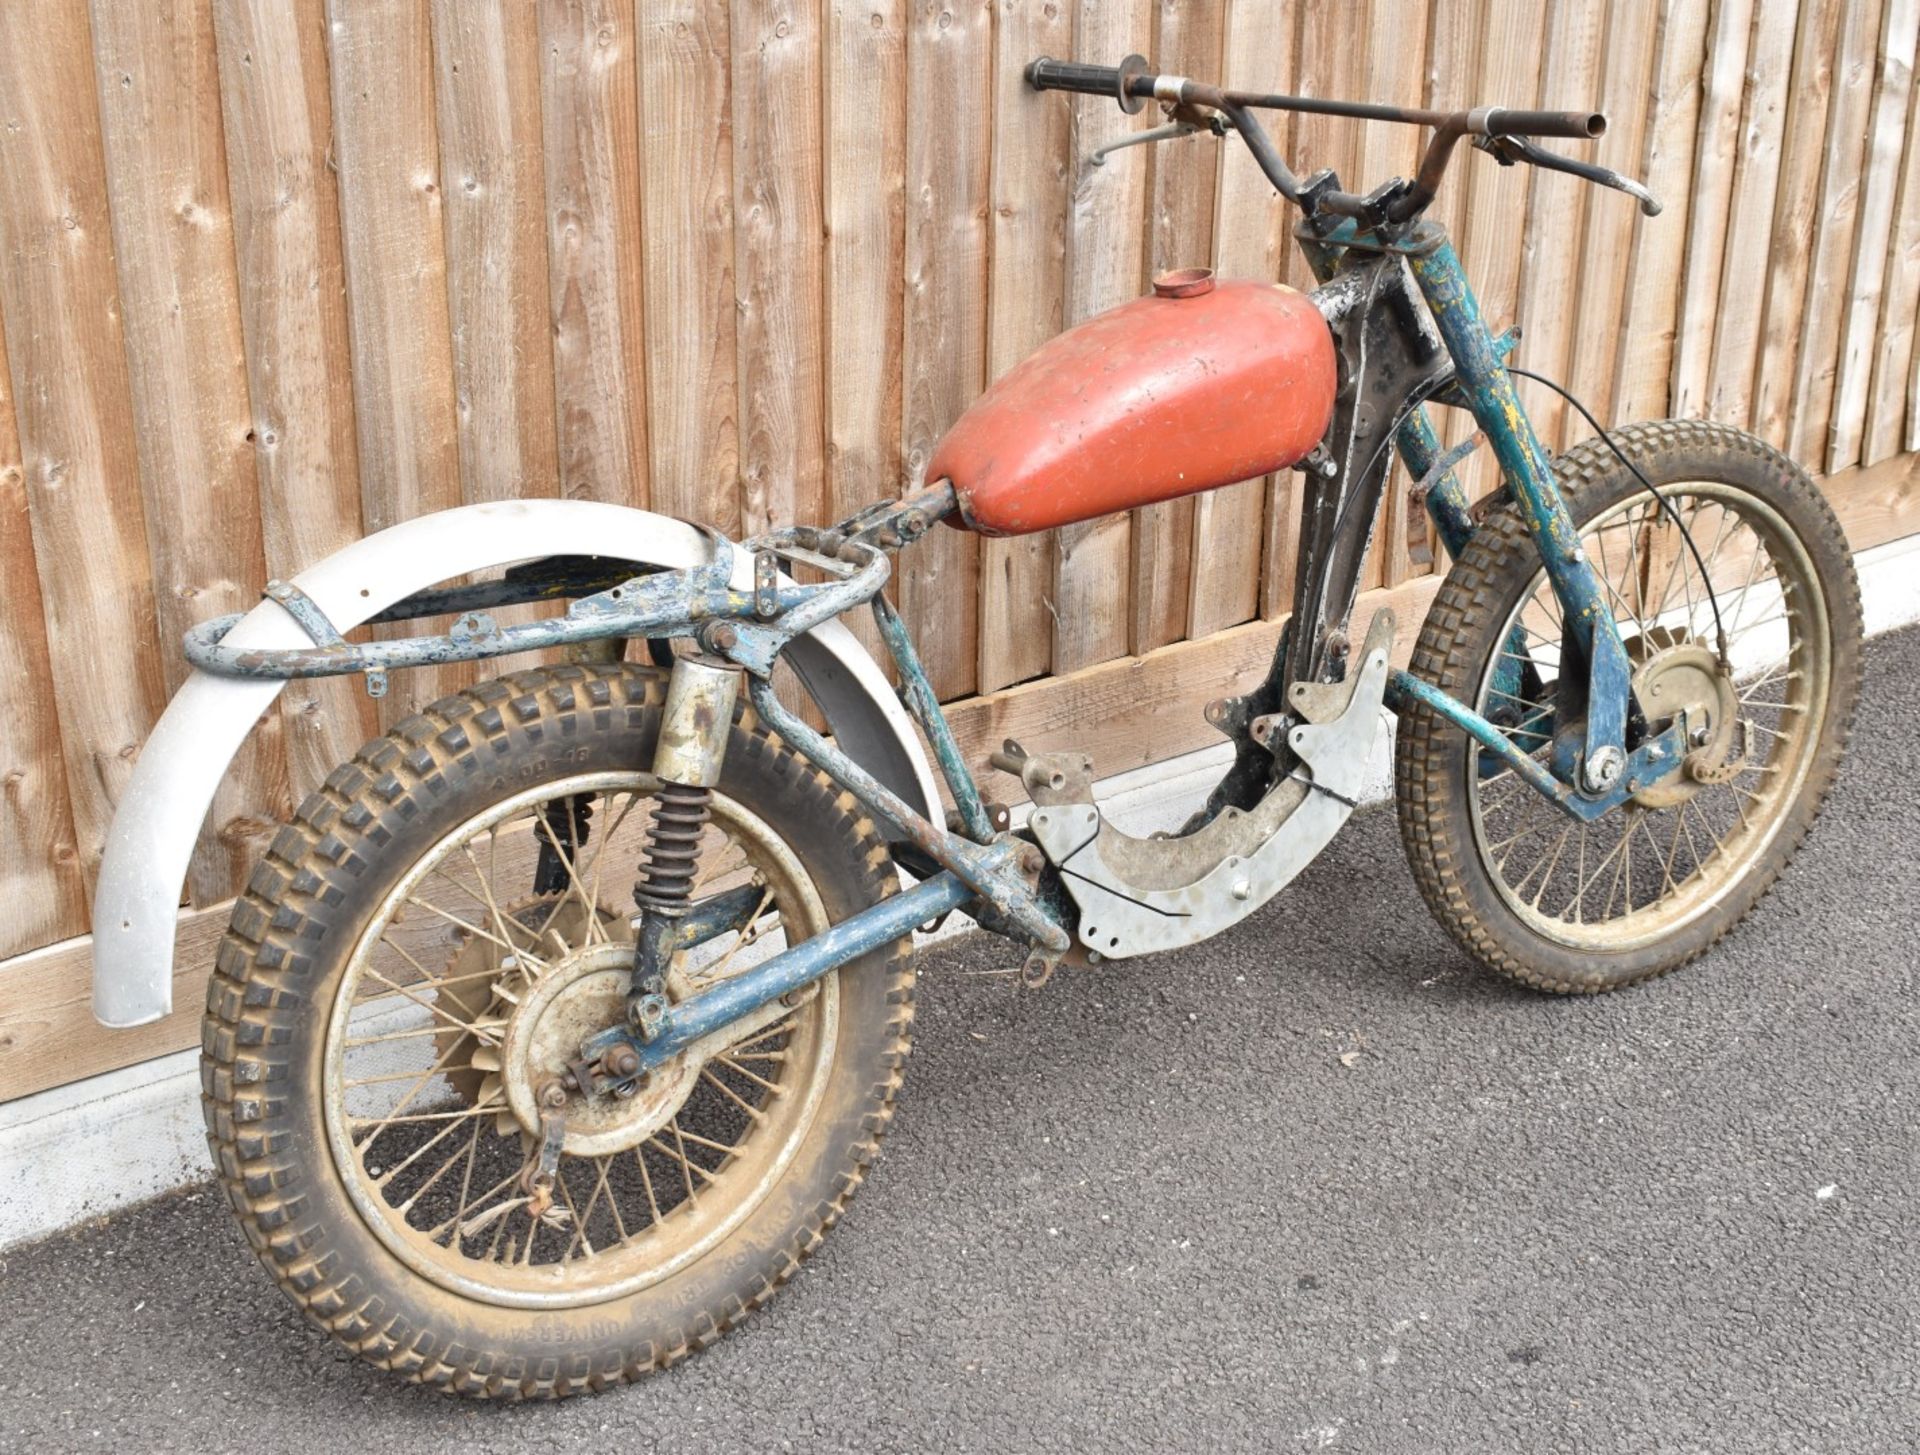 Greeves trials motorcycle, frame number 9146/TA 10%+VAT buyer's premium on this lot - Image 10 of 13